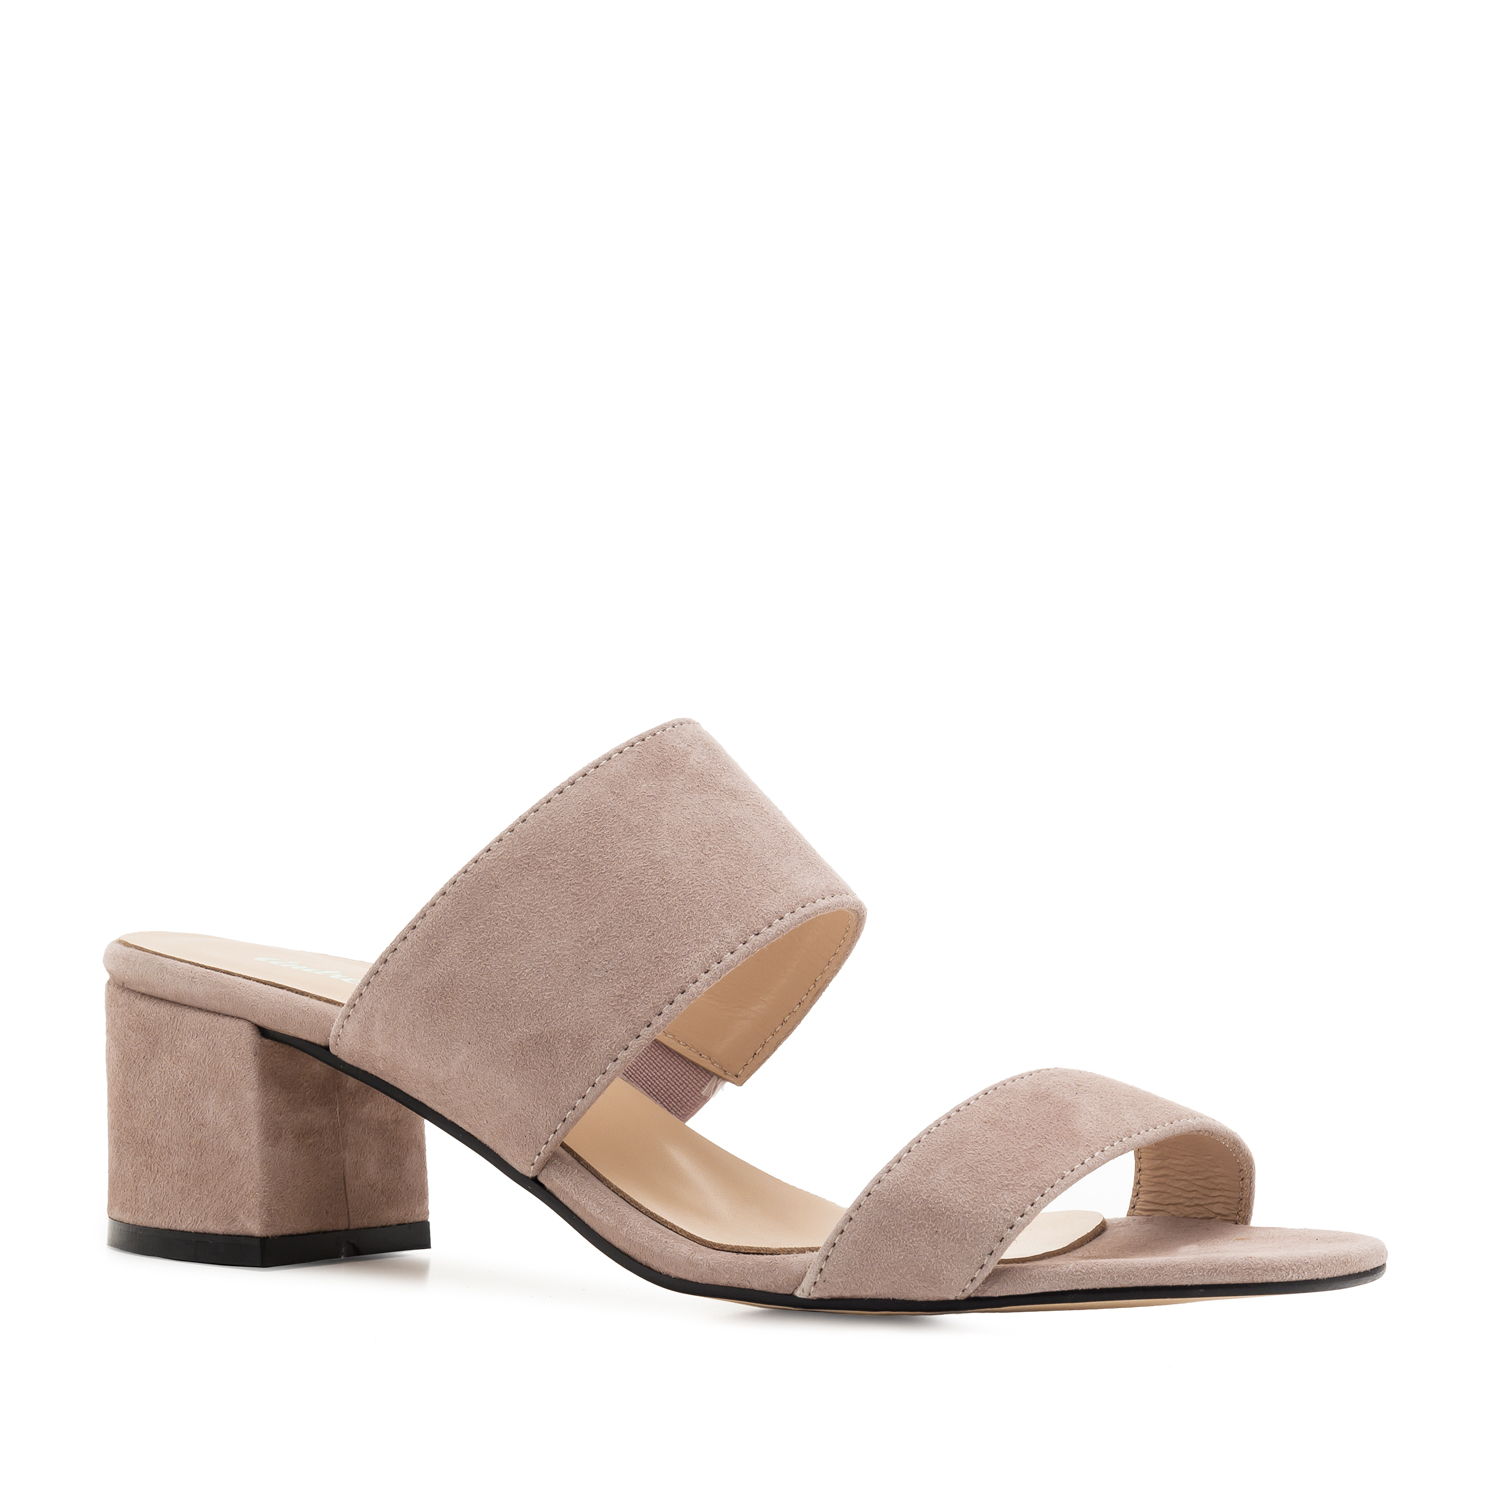 nude leather mules